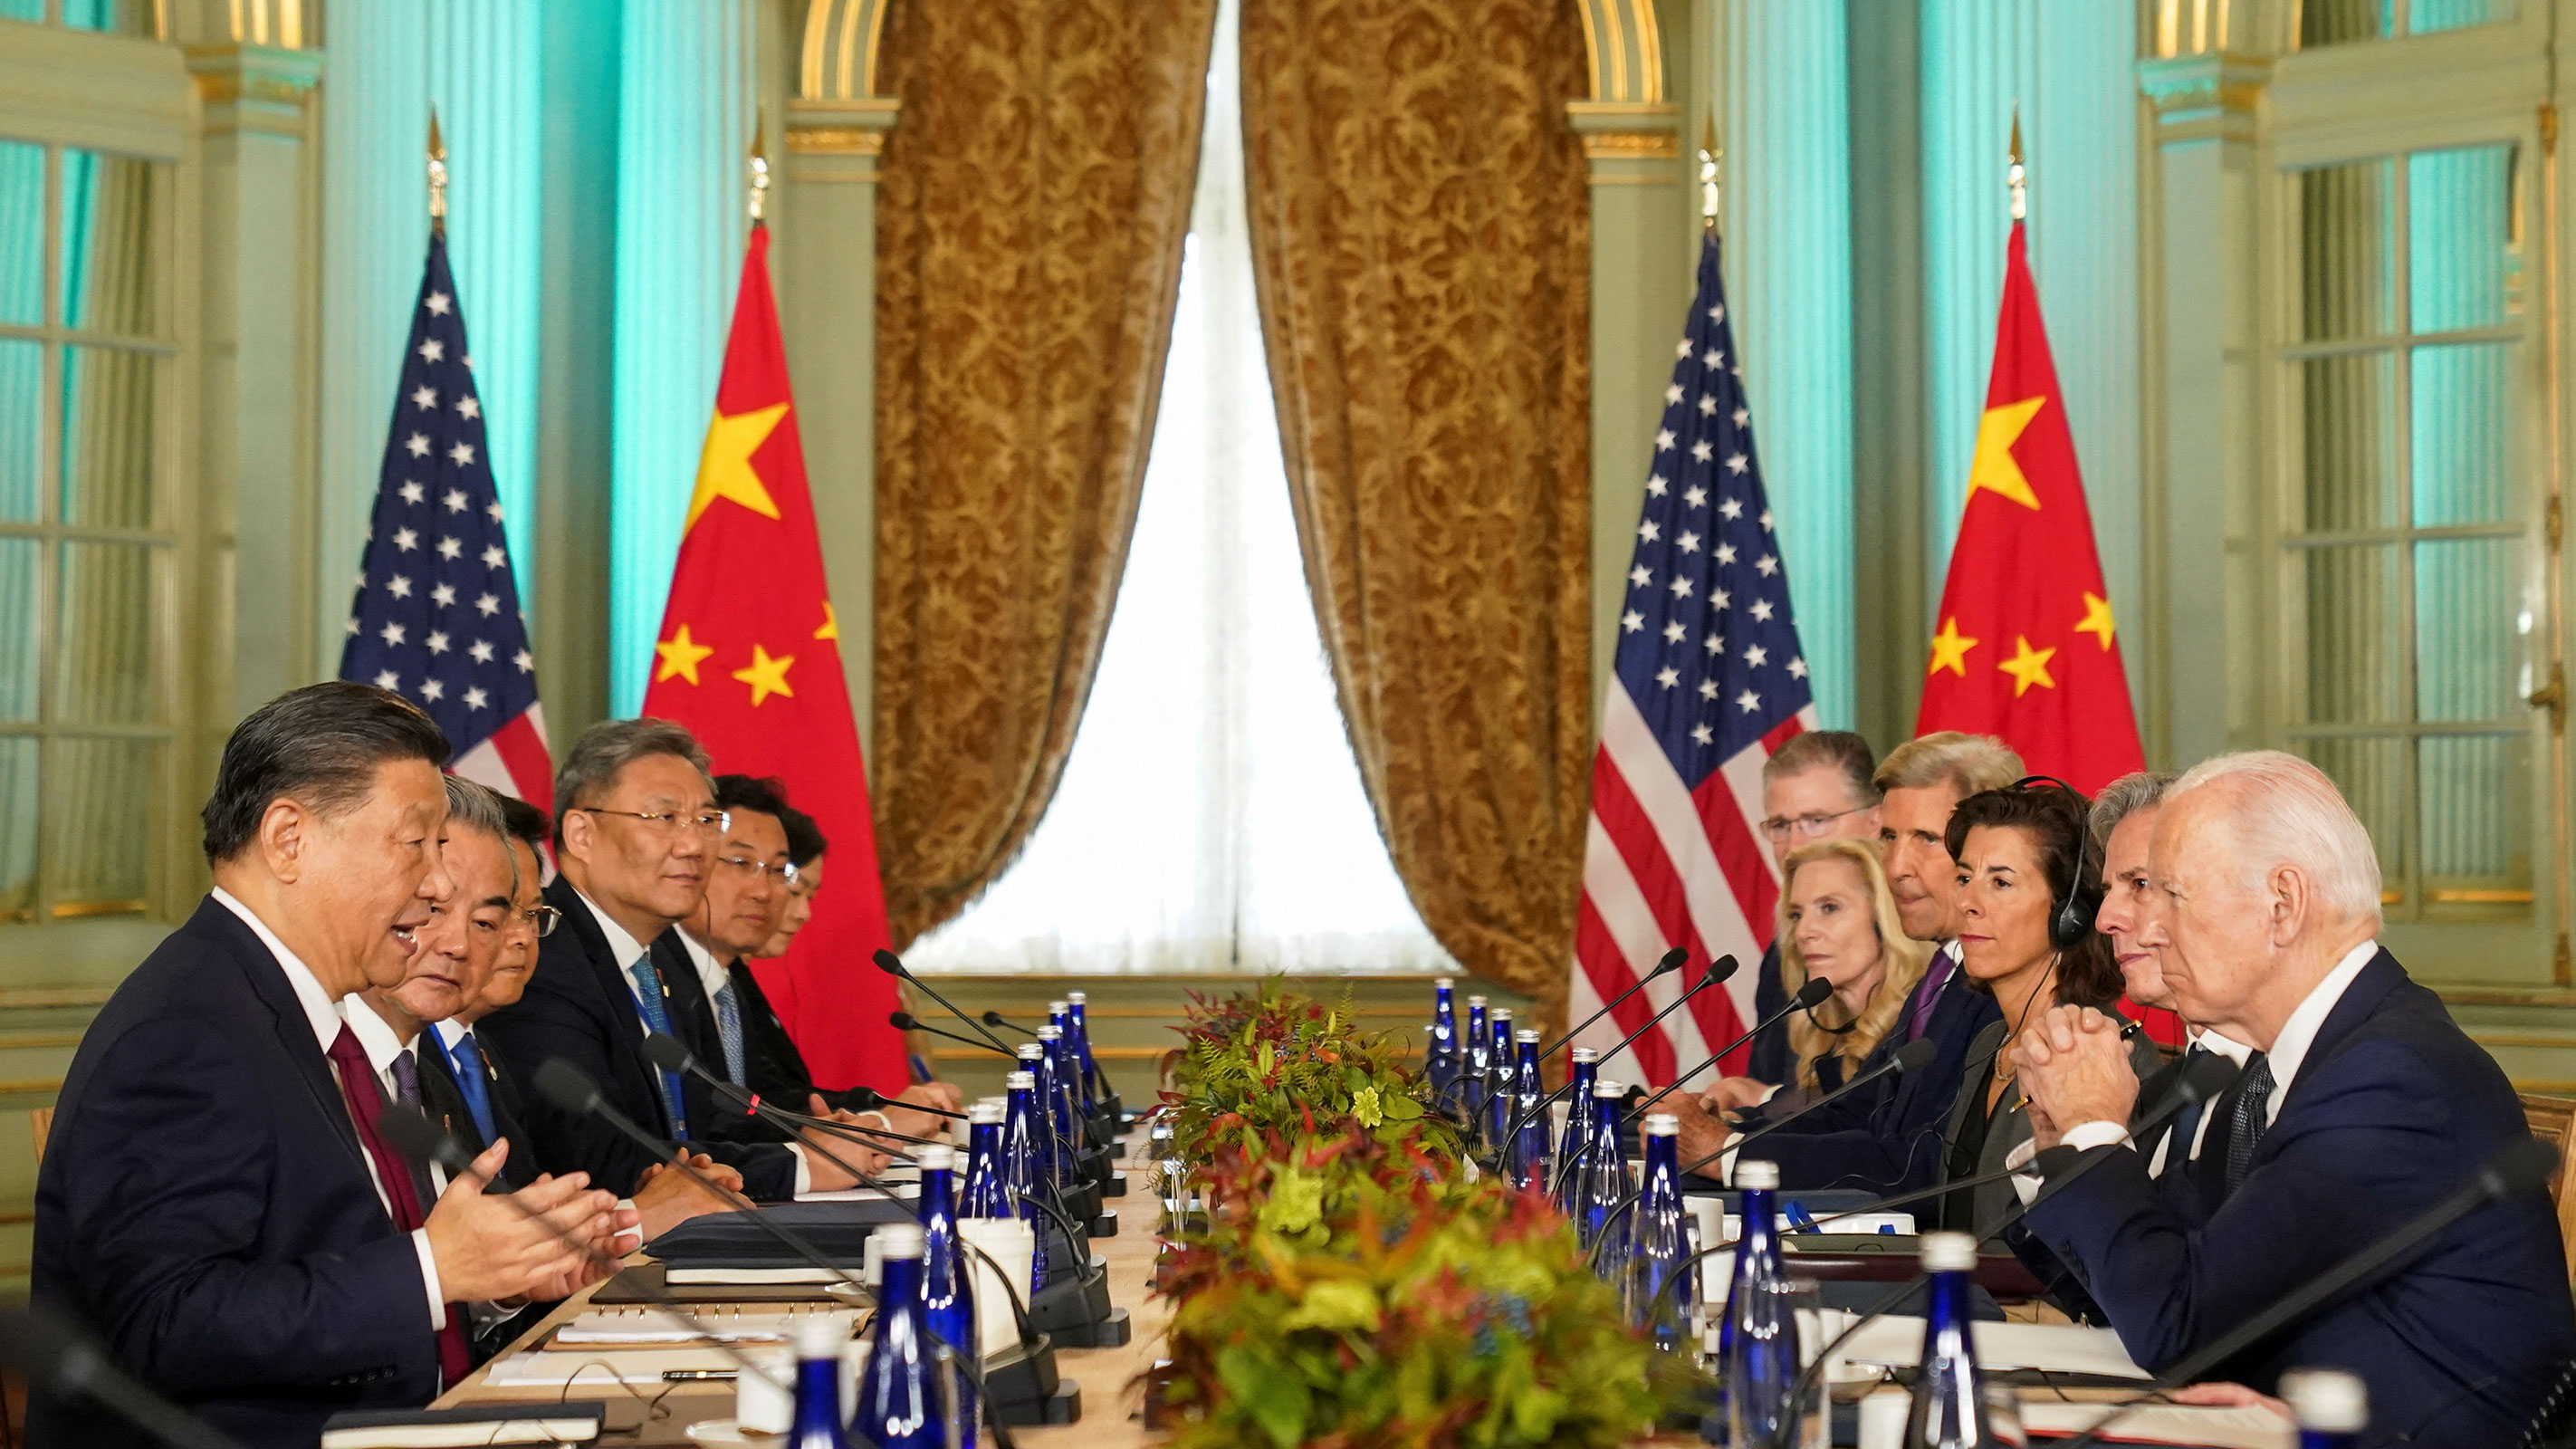 President Joe Biden and Chinese President Xi Jinping attend a bilateral meeting at Filoli estate on the sidelines of the APEC summit, in Woodside, California, on November 15.